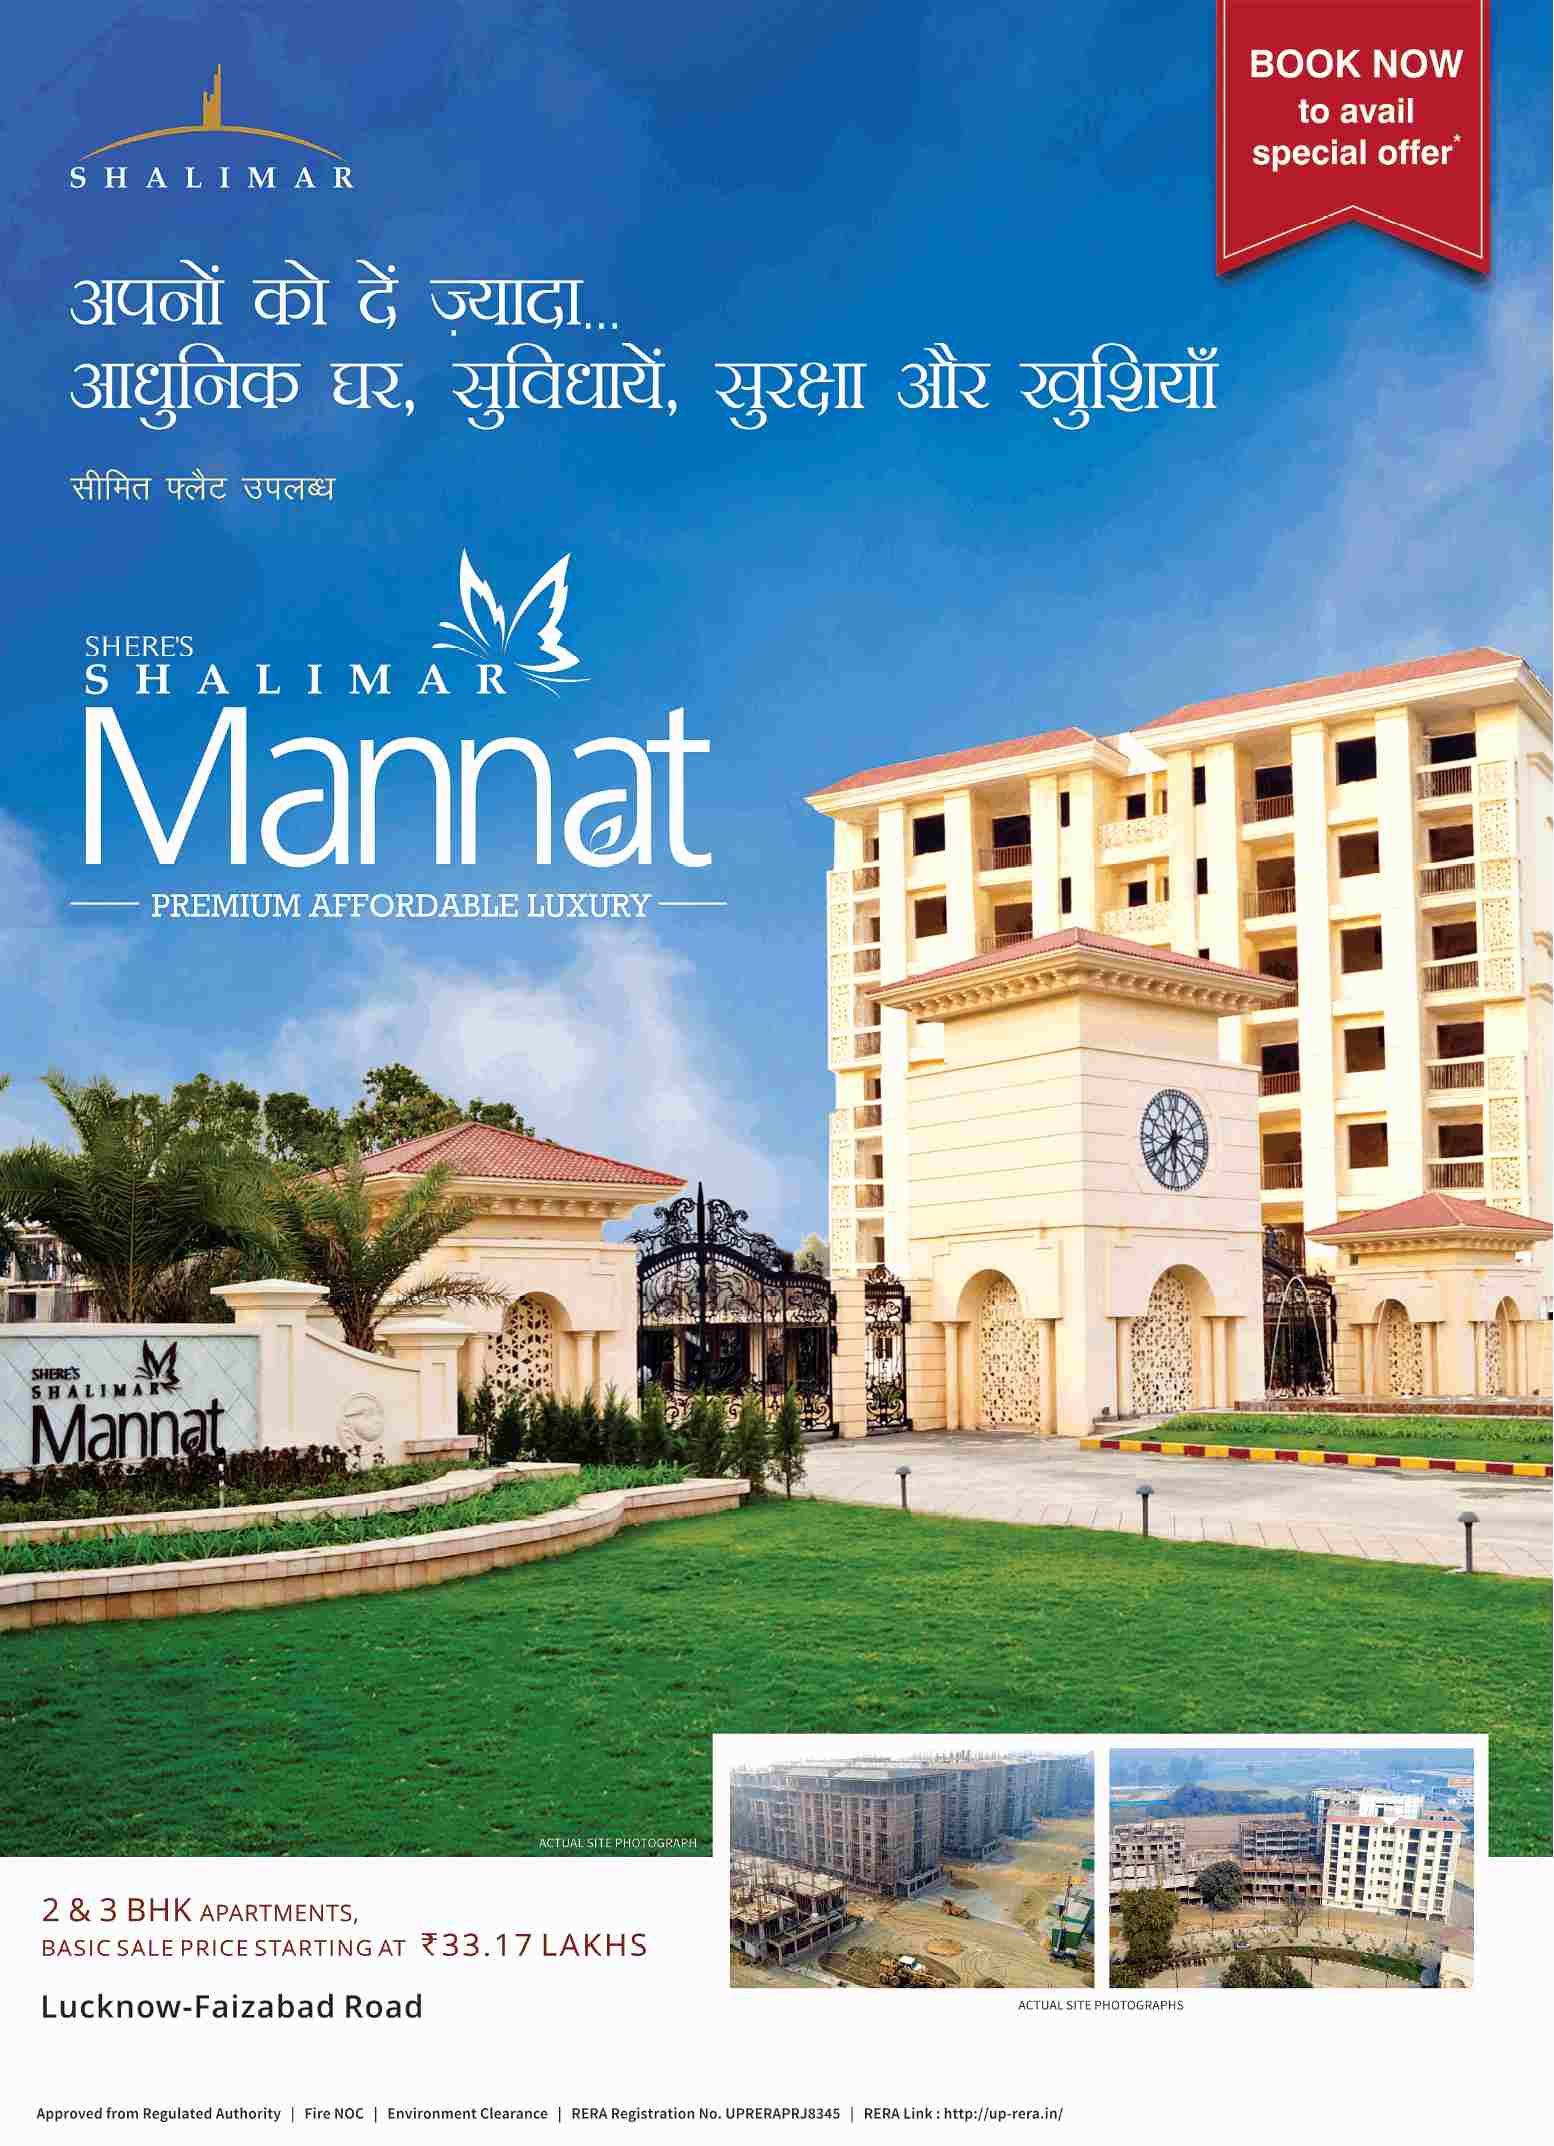 Reside in the pure amalgam of comfort and style at Shalimar Mannat in Lucknow